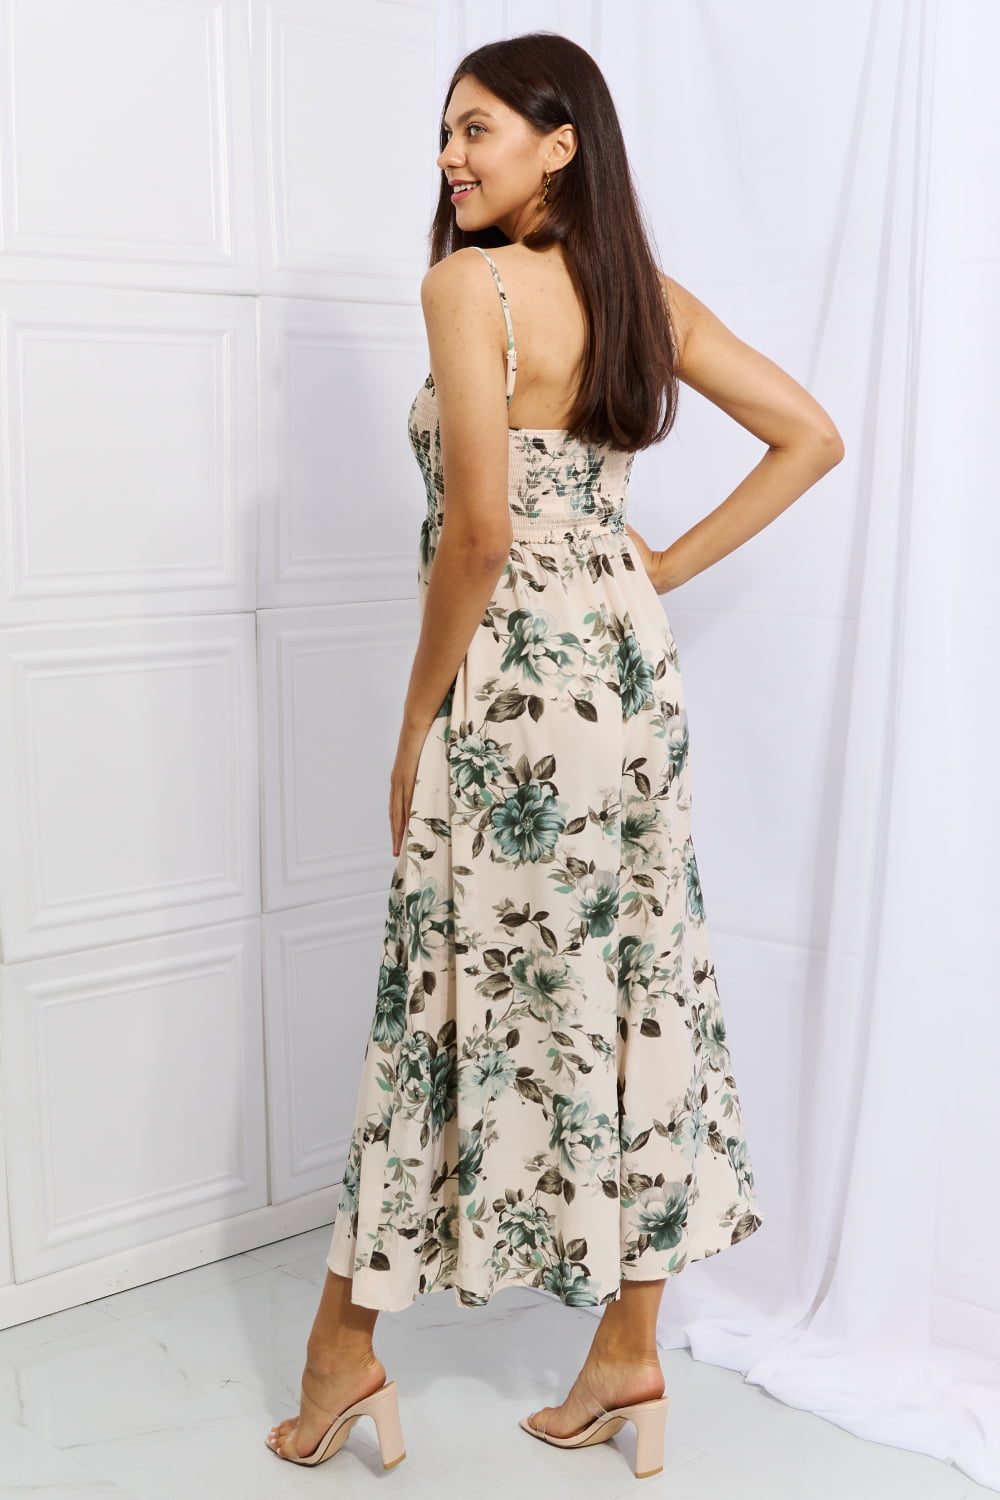 Hold Me Tight Sleeveless Floral Maxi Dress in Sage - All Dresses - Dresses - 2 - 2024